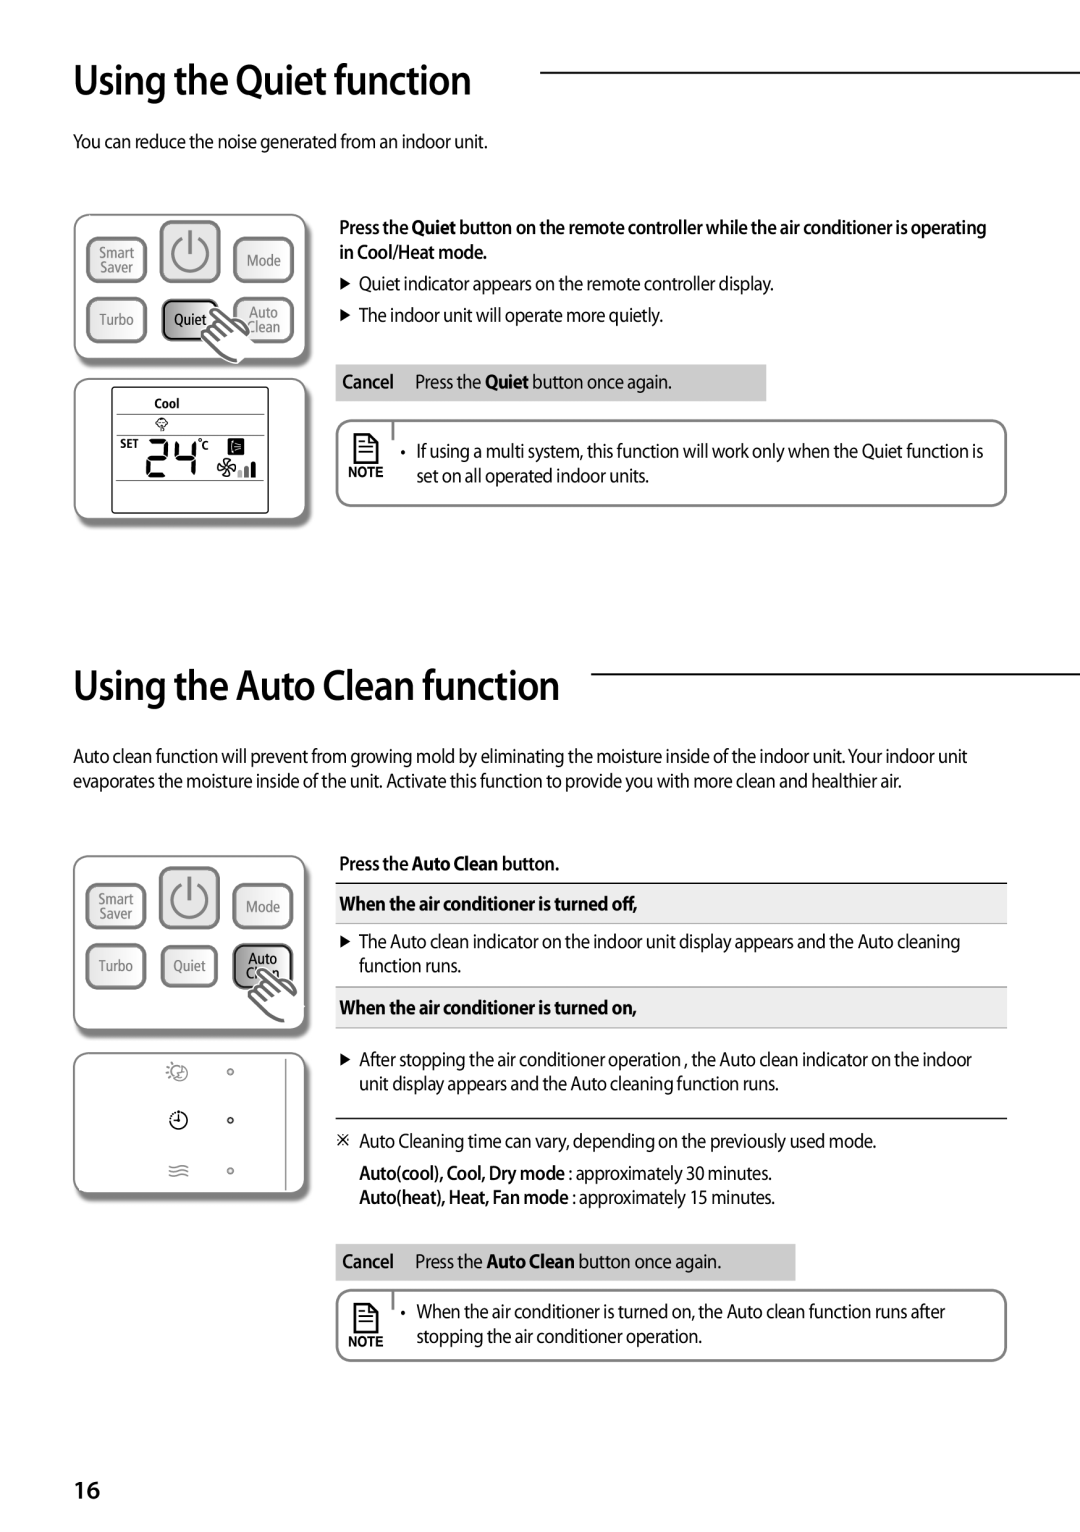 Samsung AQV12PSBX manual Using the Quiet function, Using the Auto Clean function, When the air conditioner is turned on 